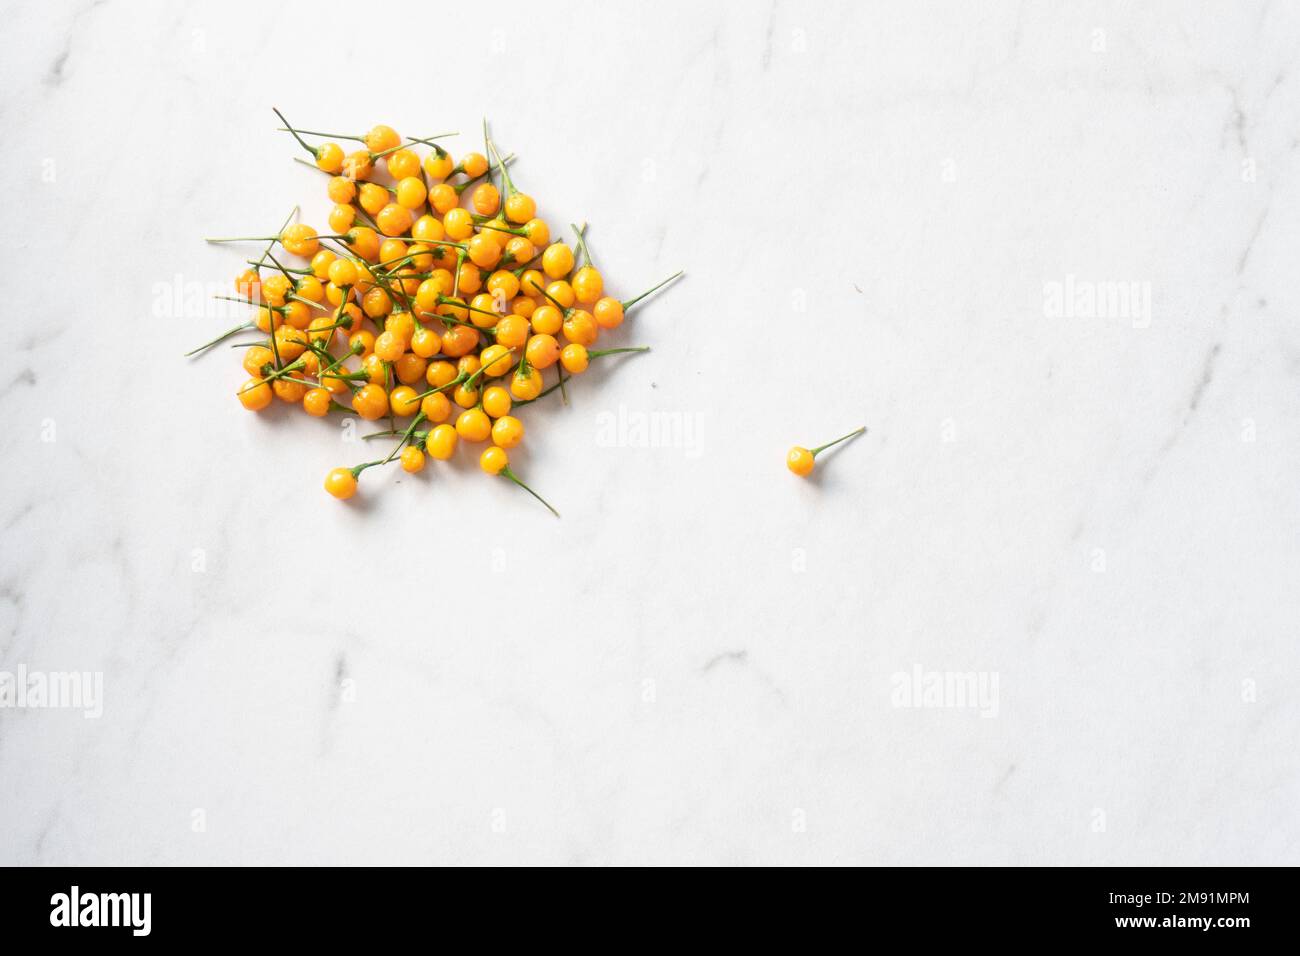 A bright yelllow aji charapita pepper sits apart from a pile on a white marble surface; food photography Stock Photo